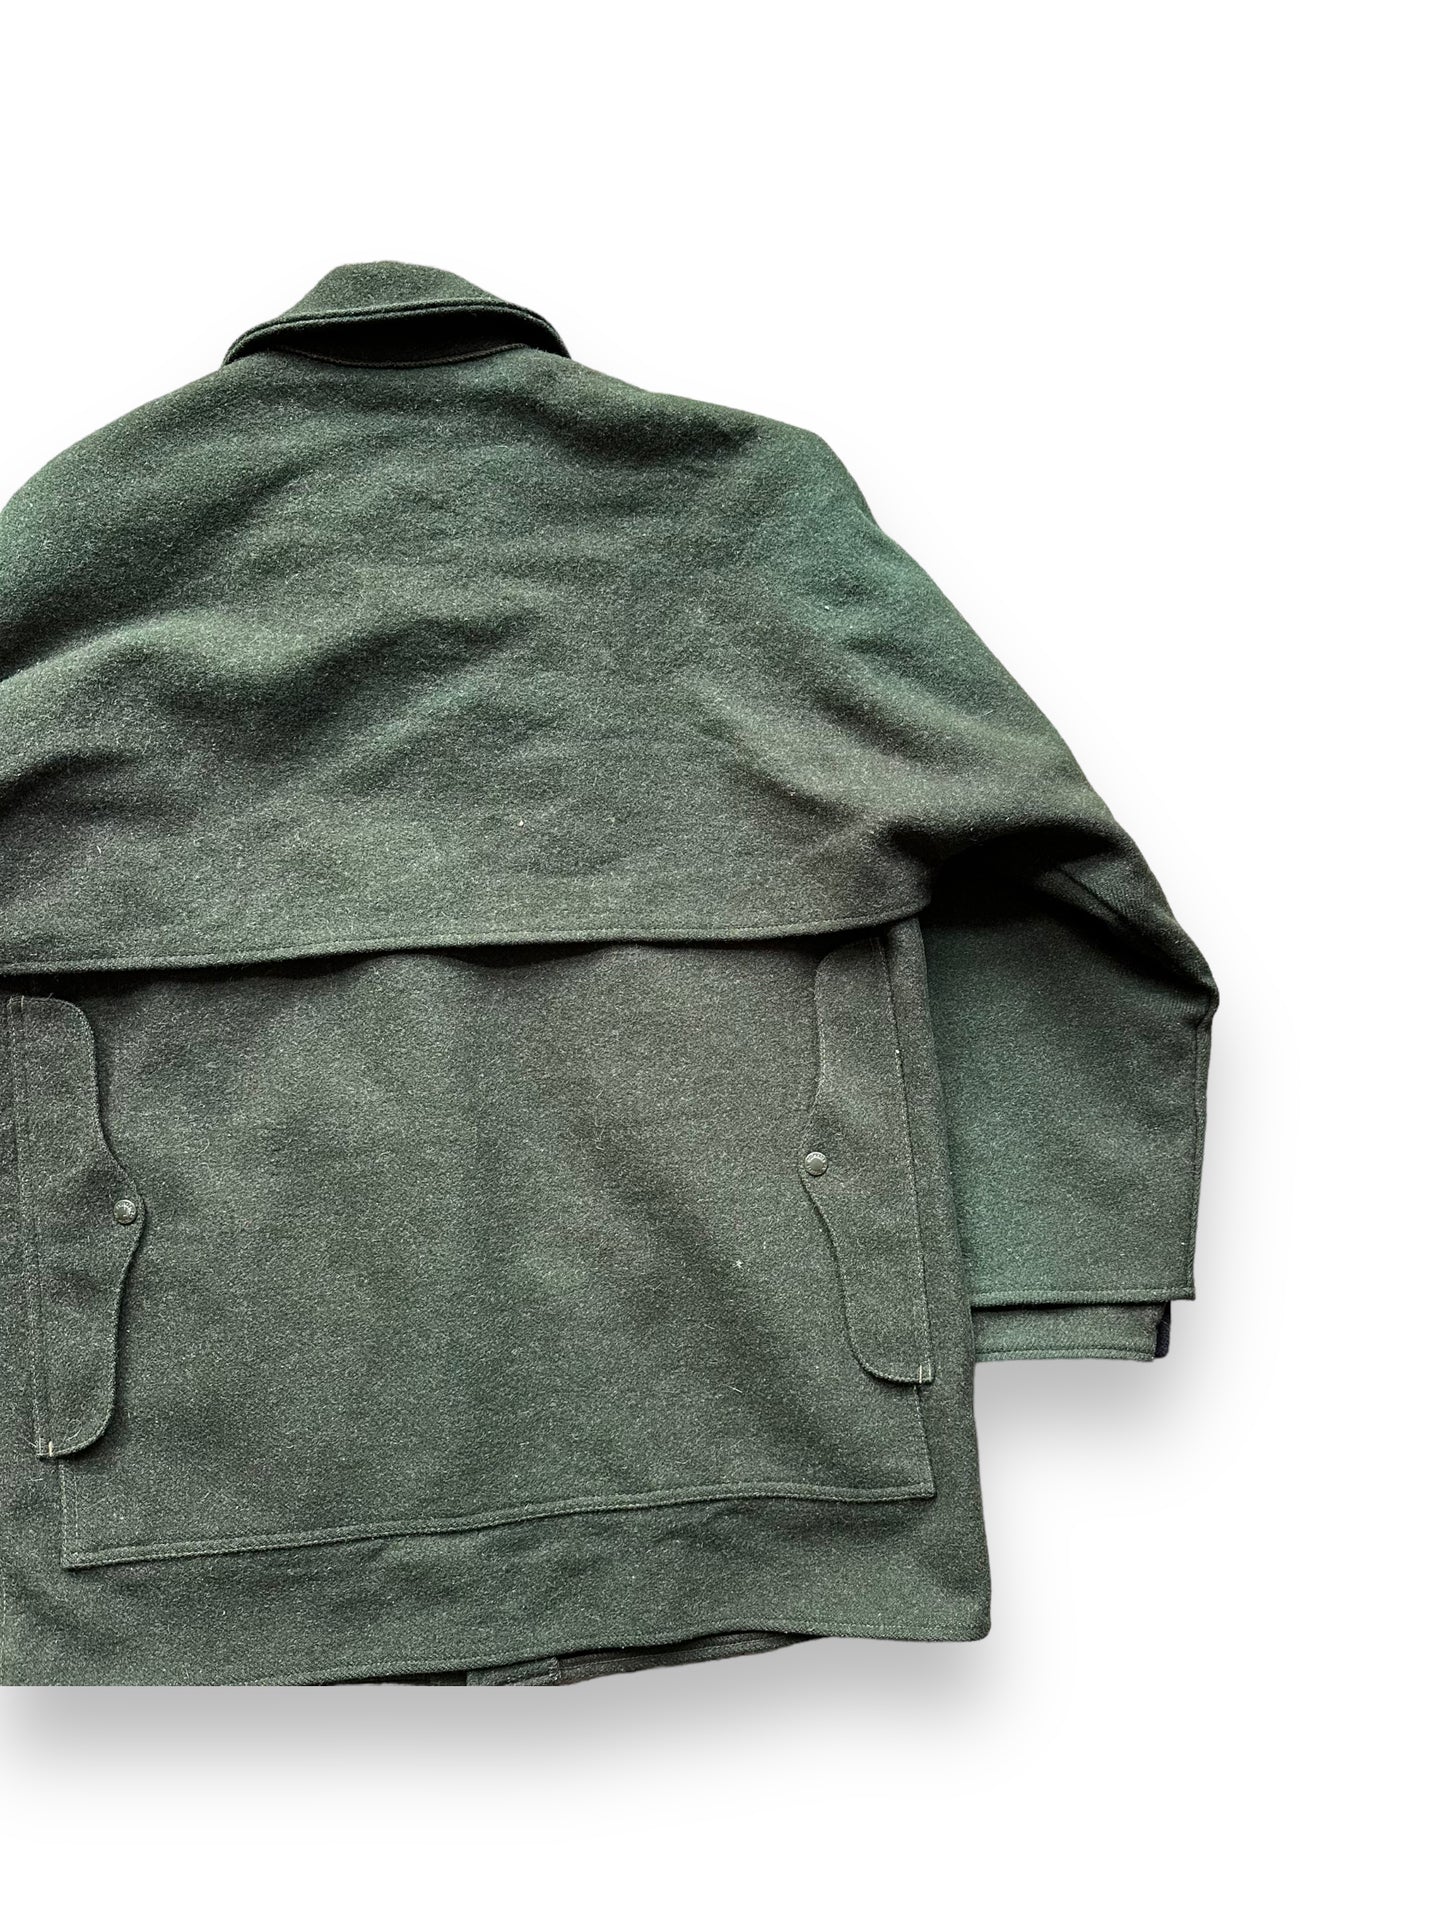 Rear Right View of Vintage Filson Forest Green Double Mackinaw Cruiser SZ 46 XL |  Barn Owl Vintage Goods | Vintage Workwear Seattle